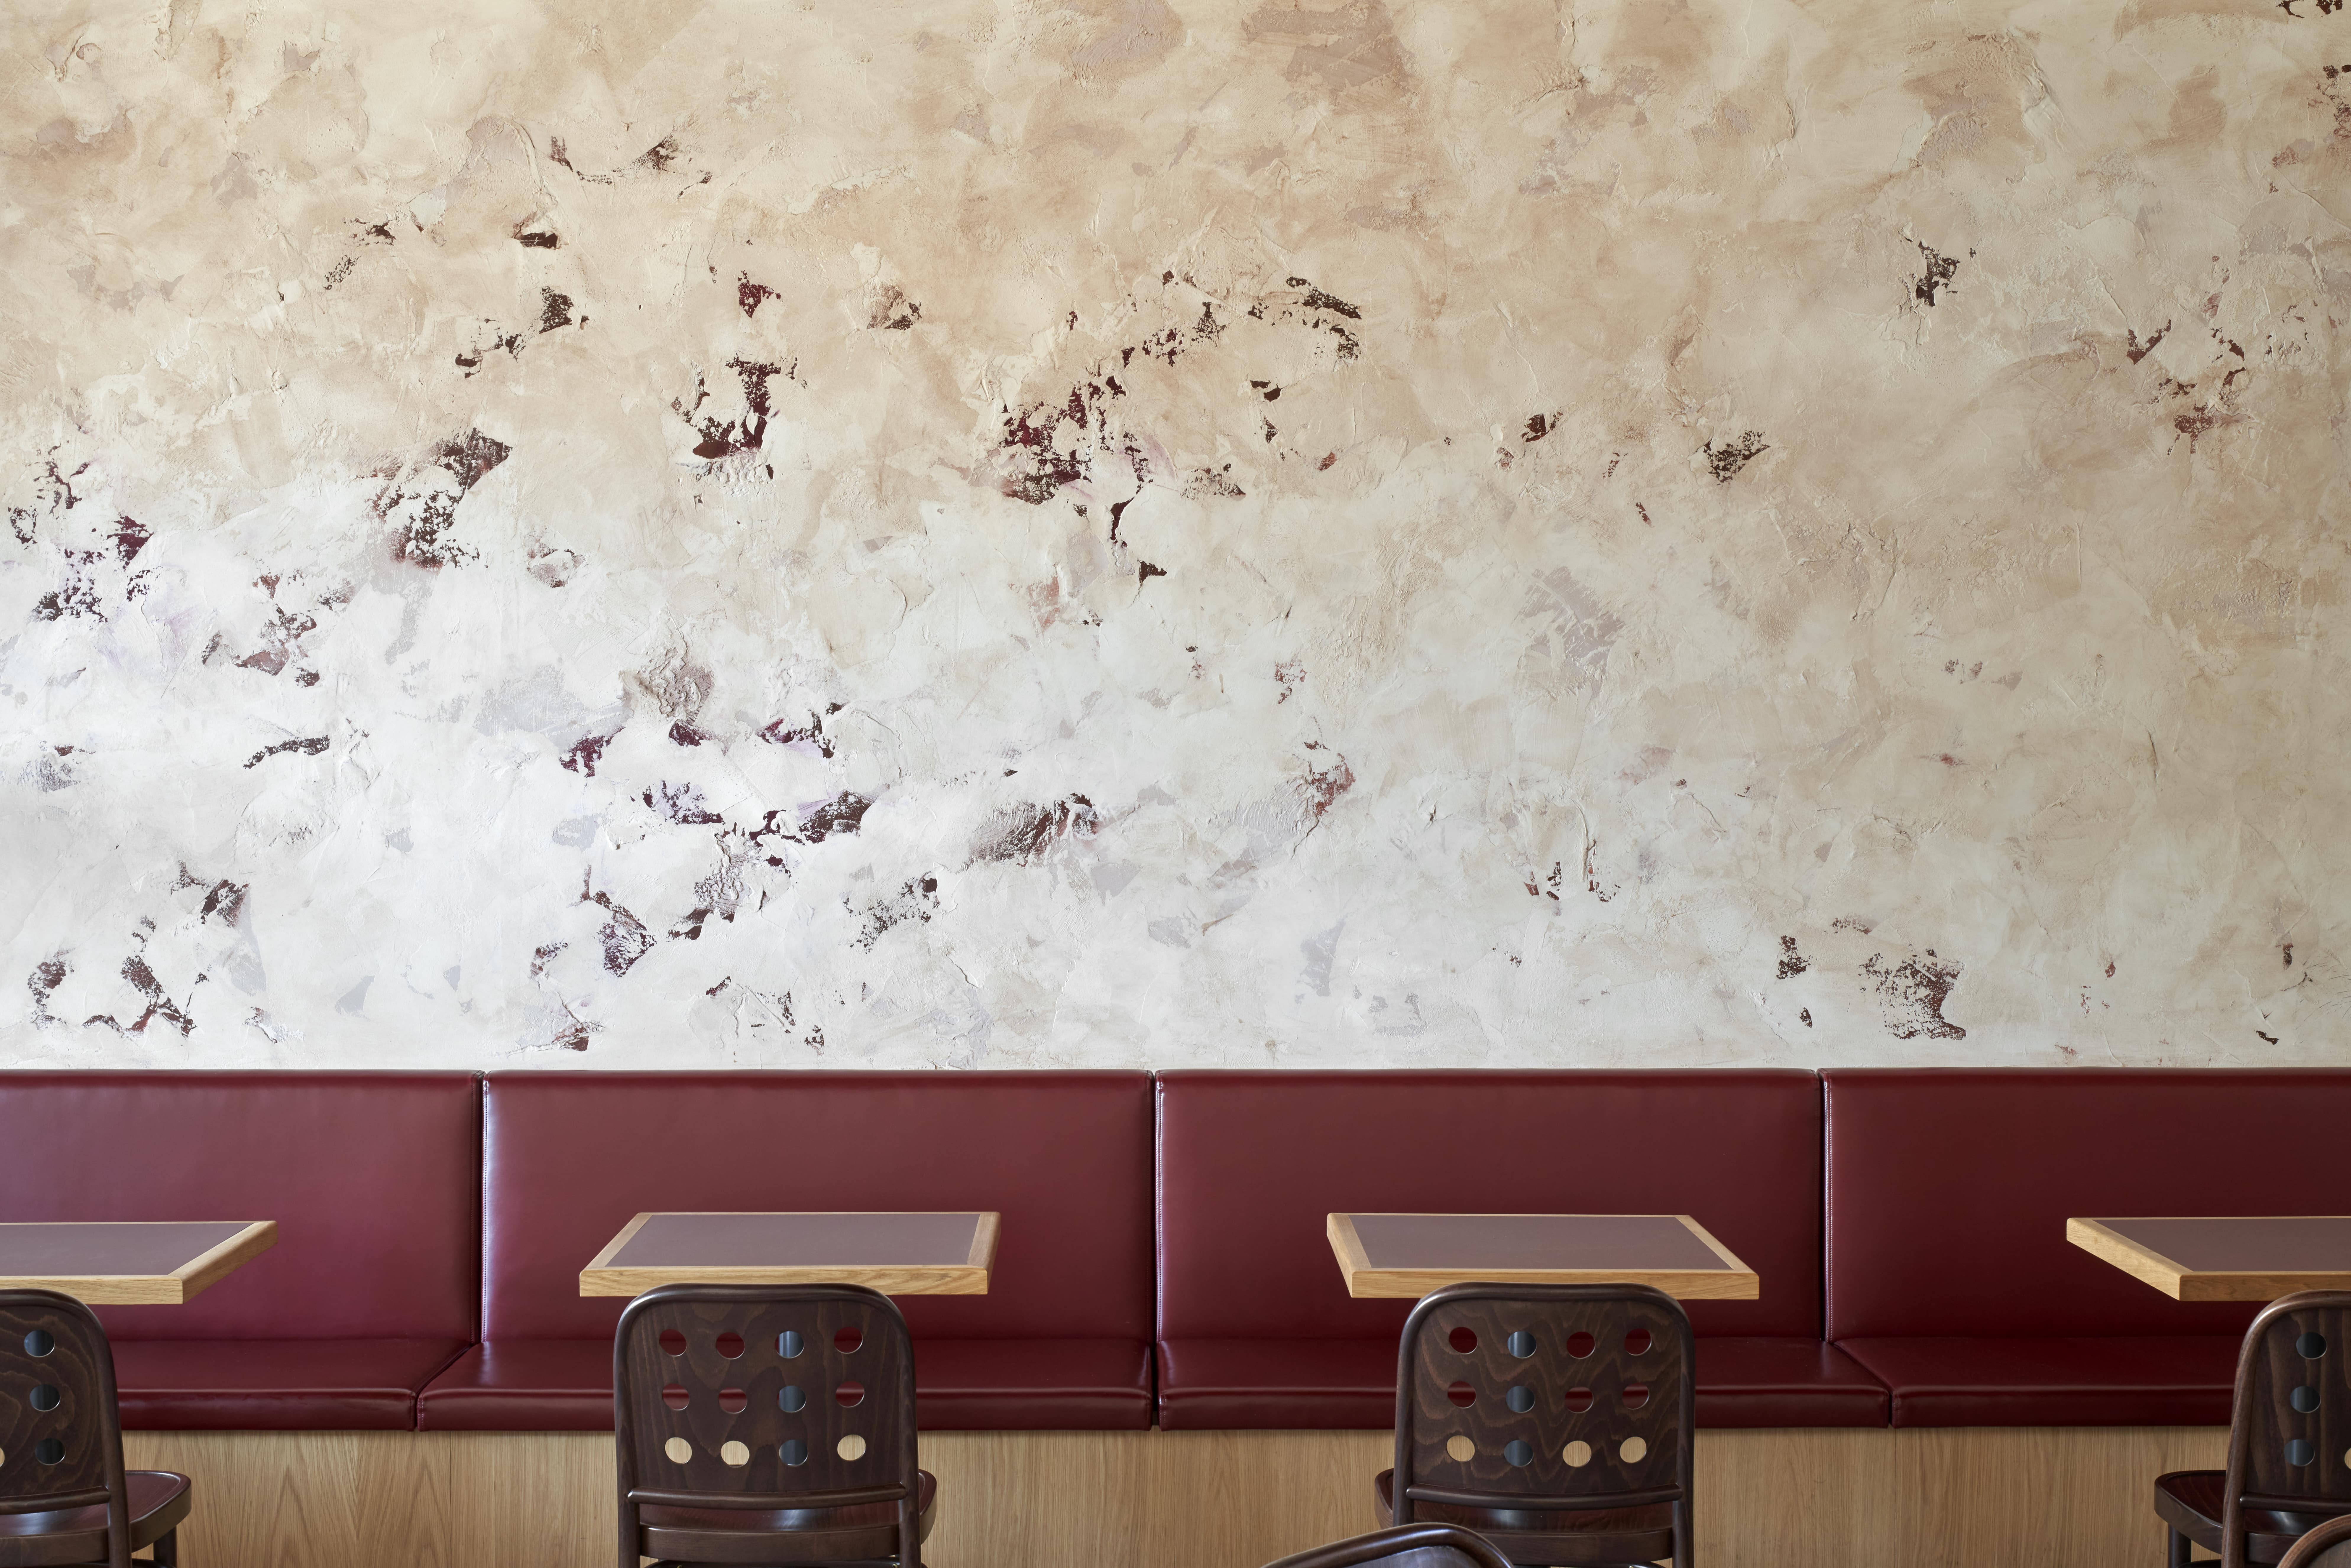 (Main dining room with abstract walls as the background)